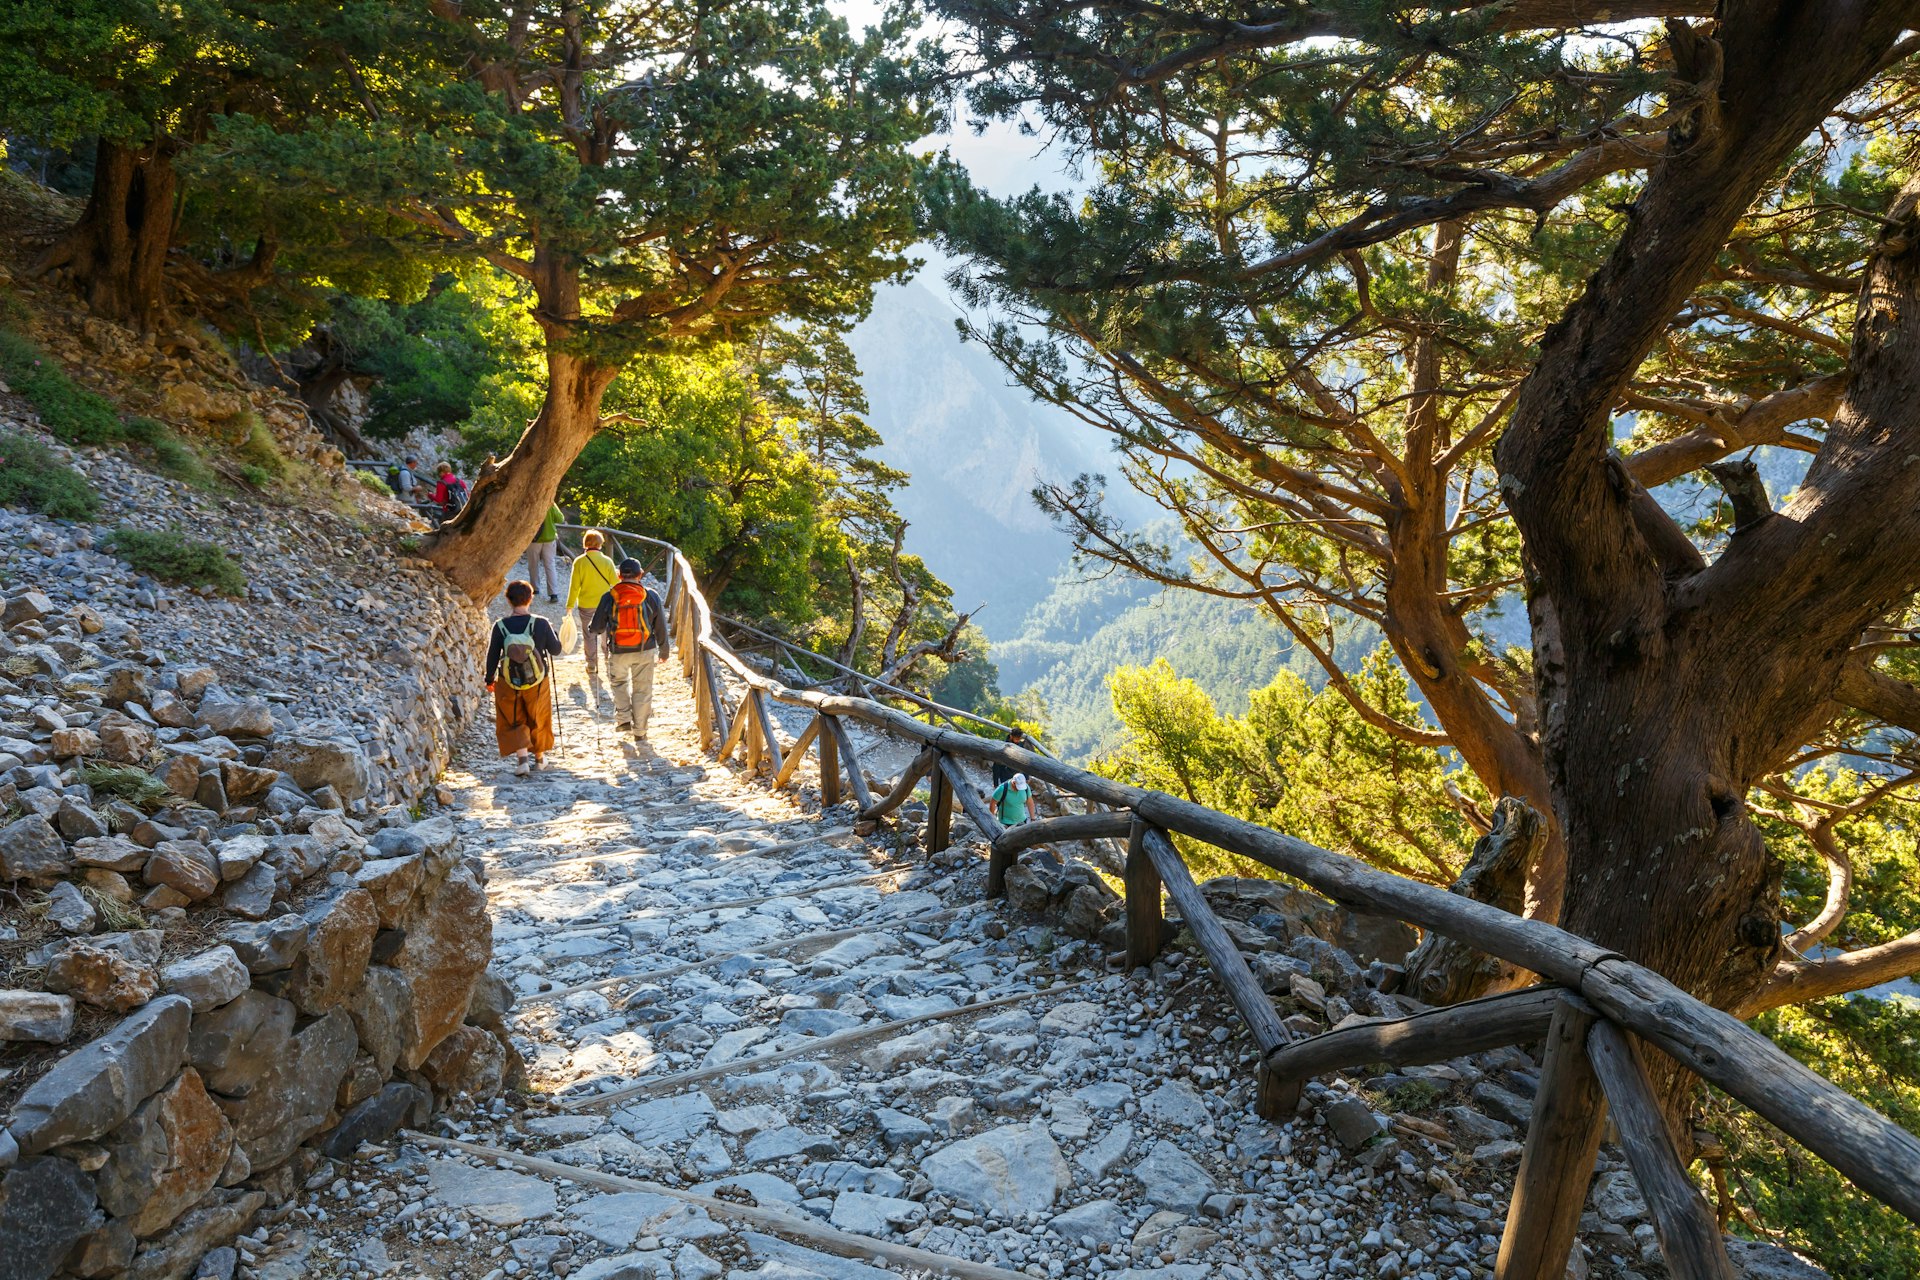 Hikers follow a stone-paved path down a hillside lined with trees heading towards a gorge